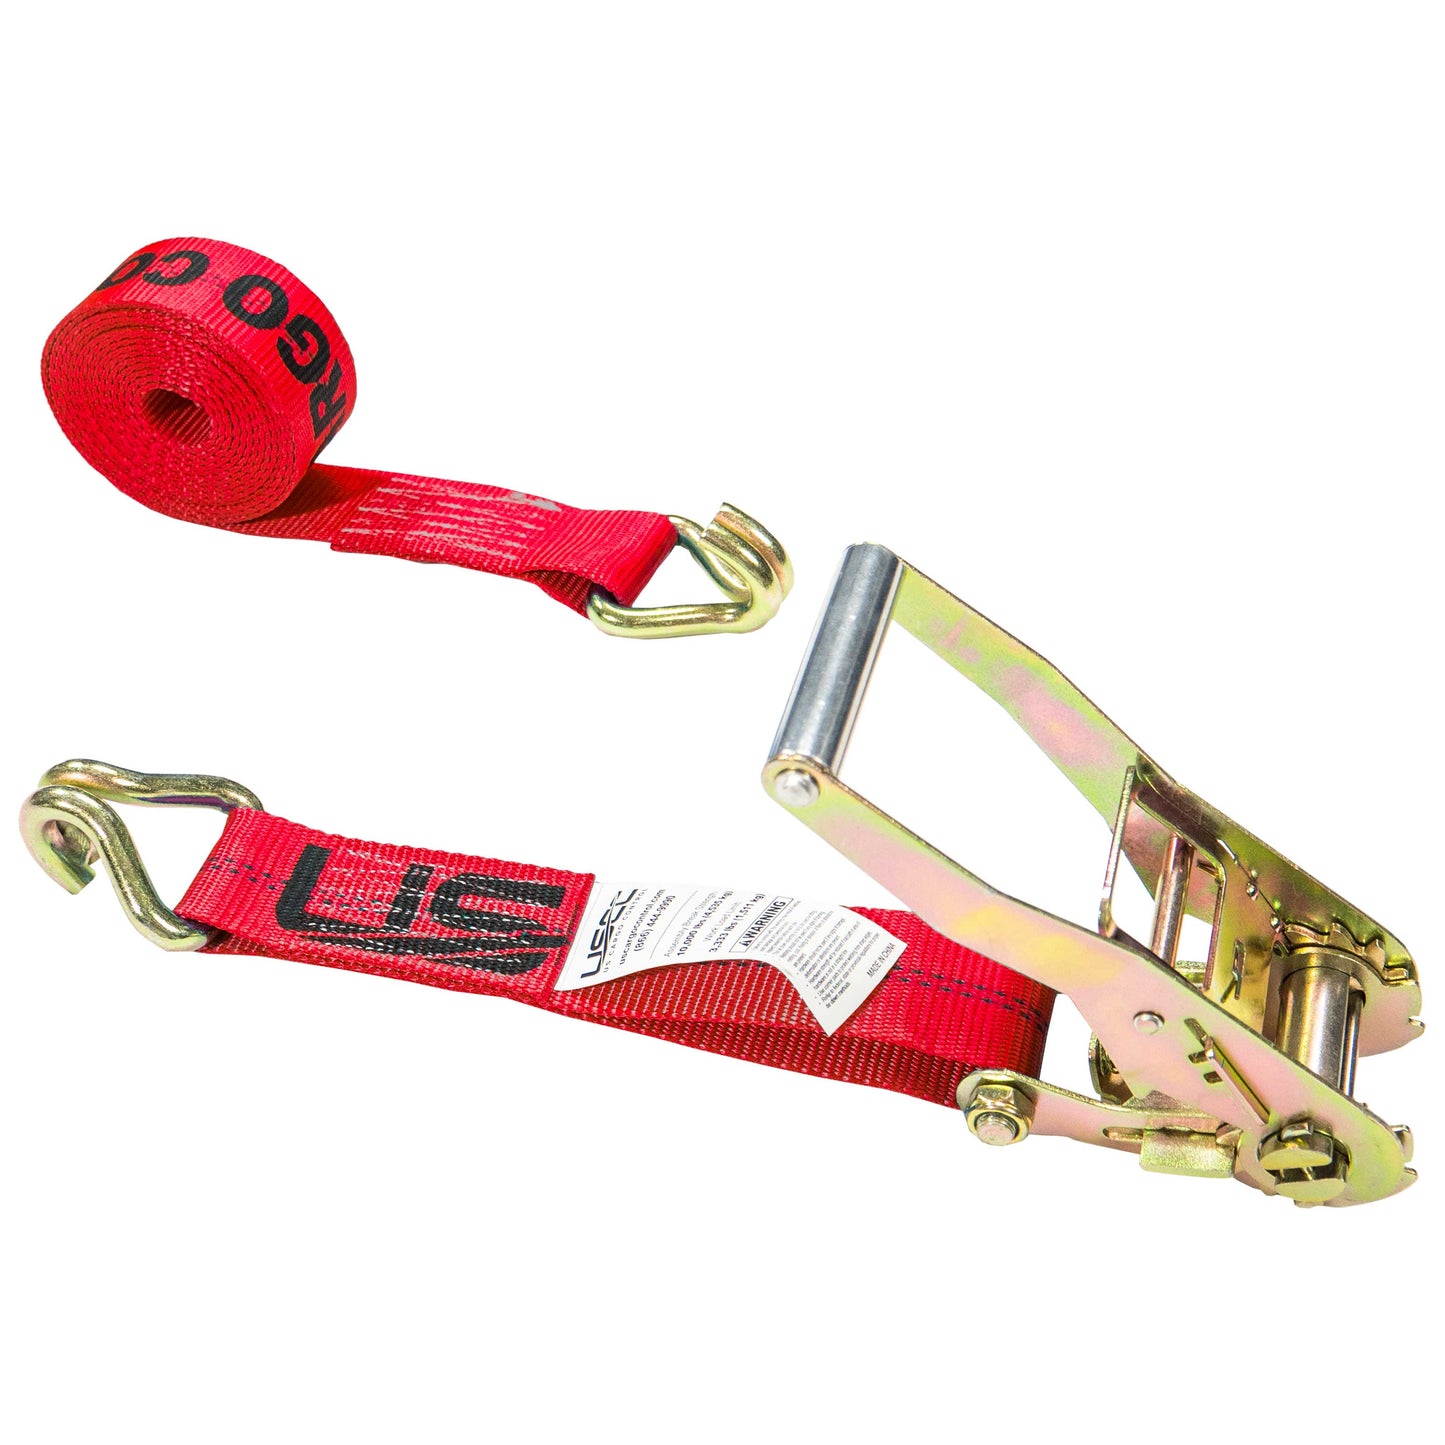 2" x 12' Red Ratchet Strap w/ Double J Hook